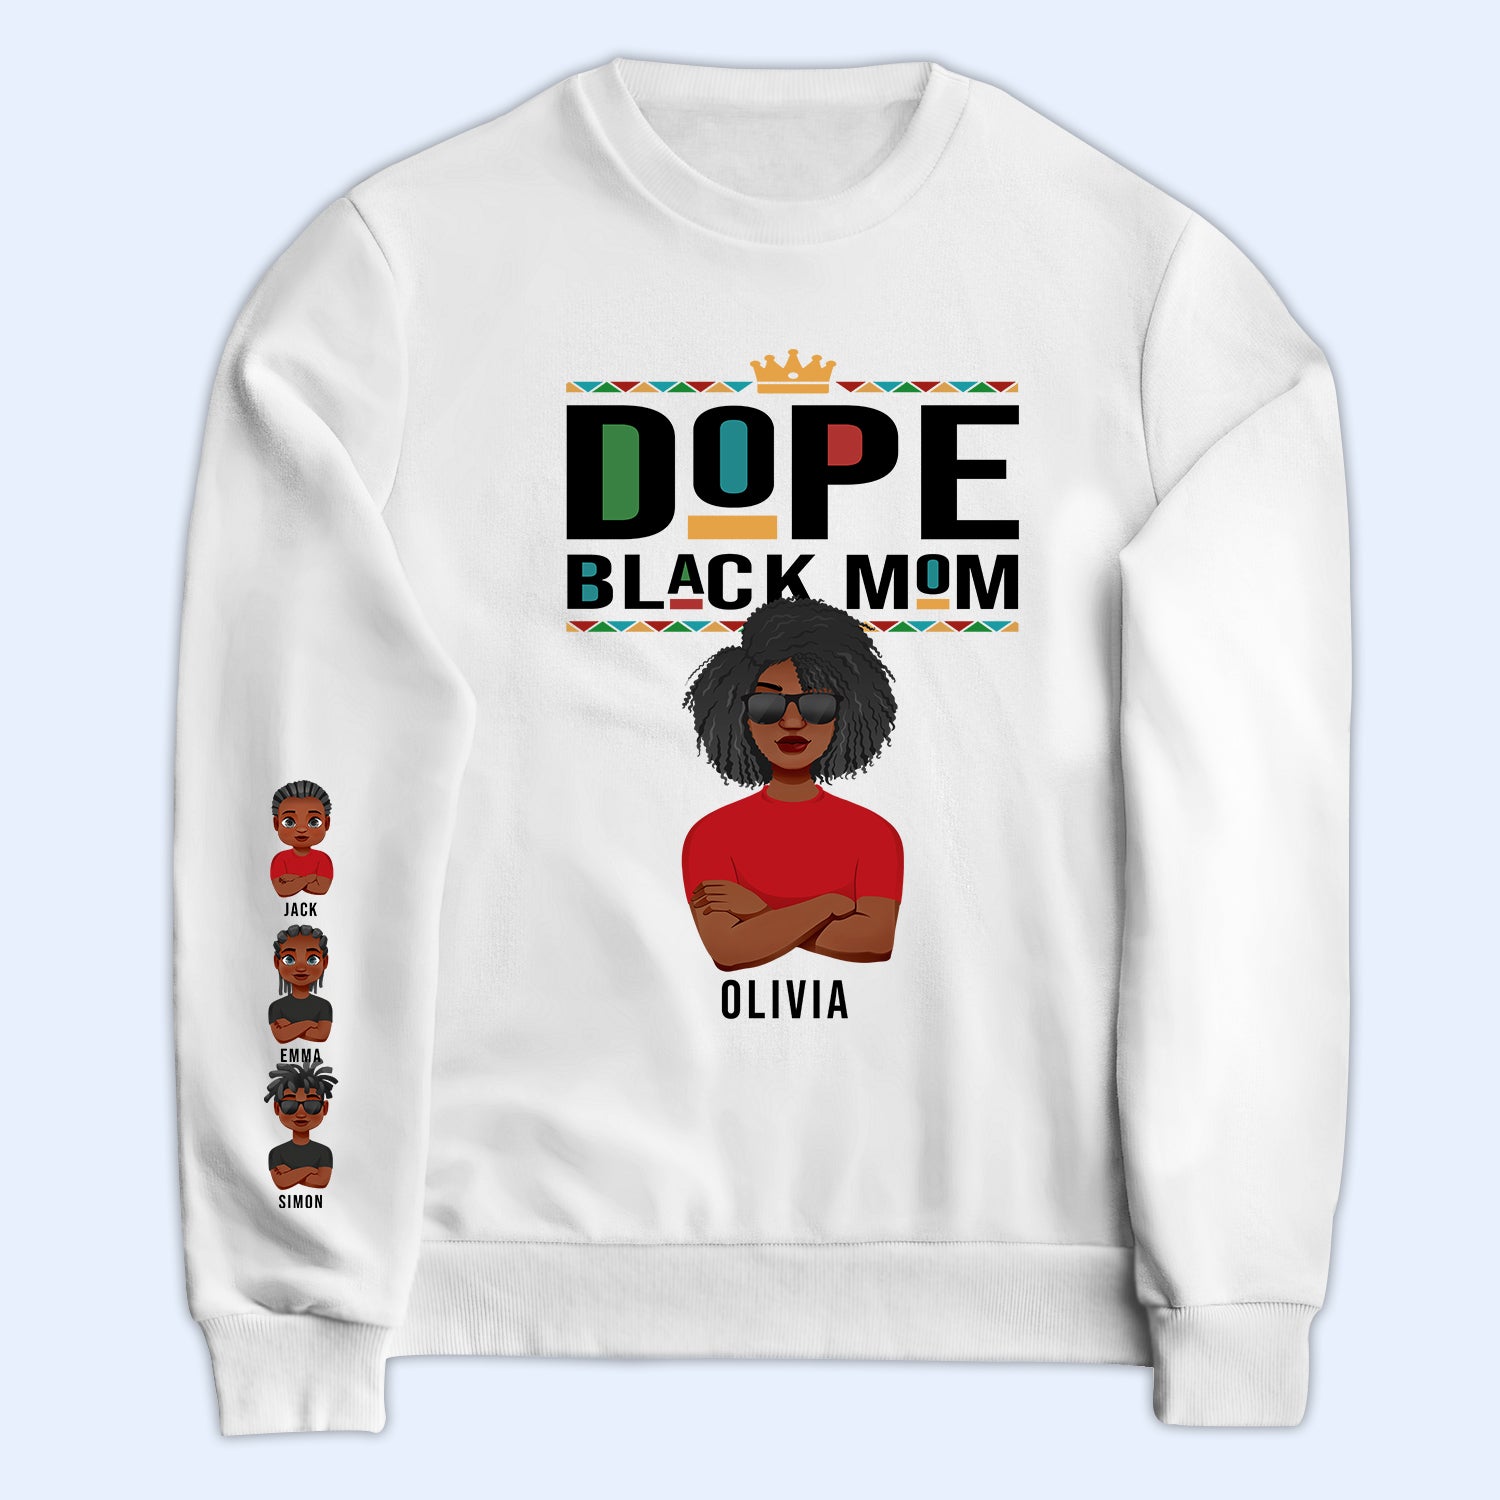 Dope Black Mom - Gift For Black Mom - Personalized Unisex Sweatshirt With Design On Sleeve